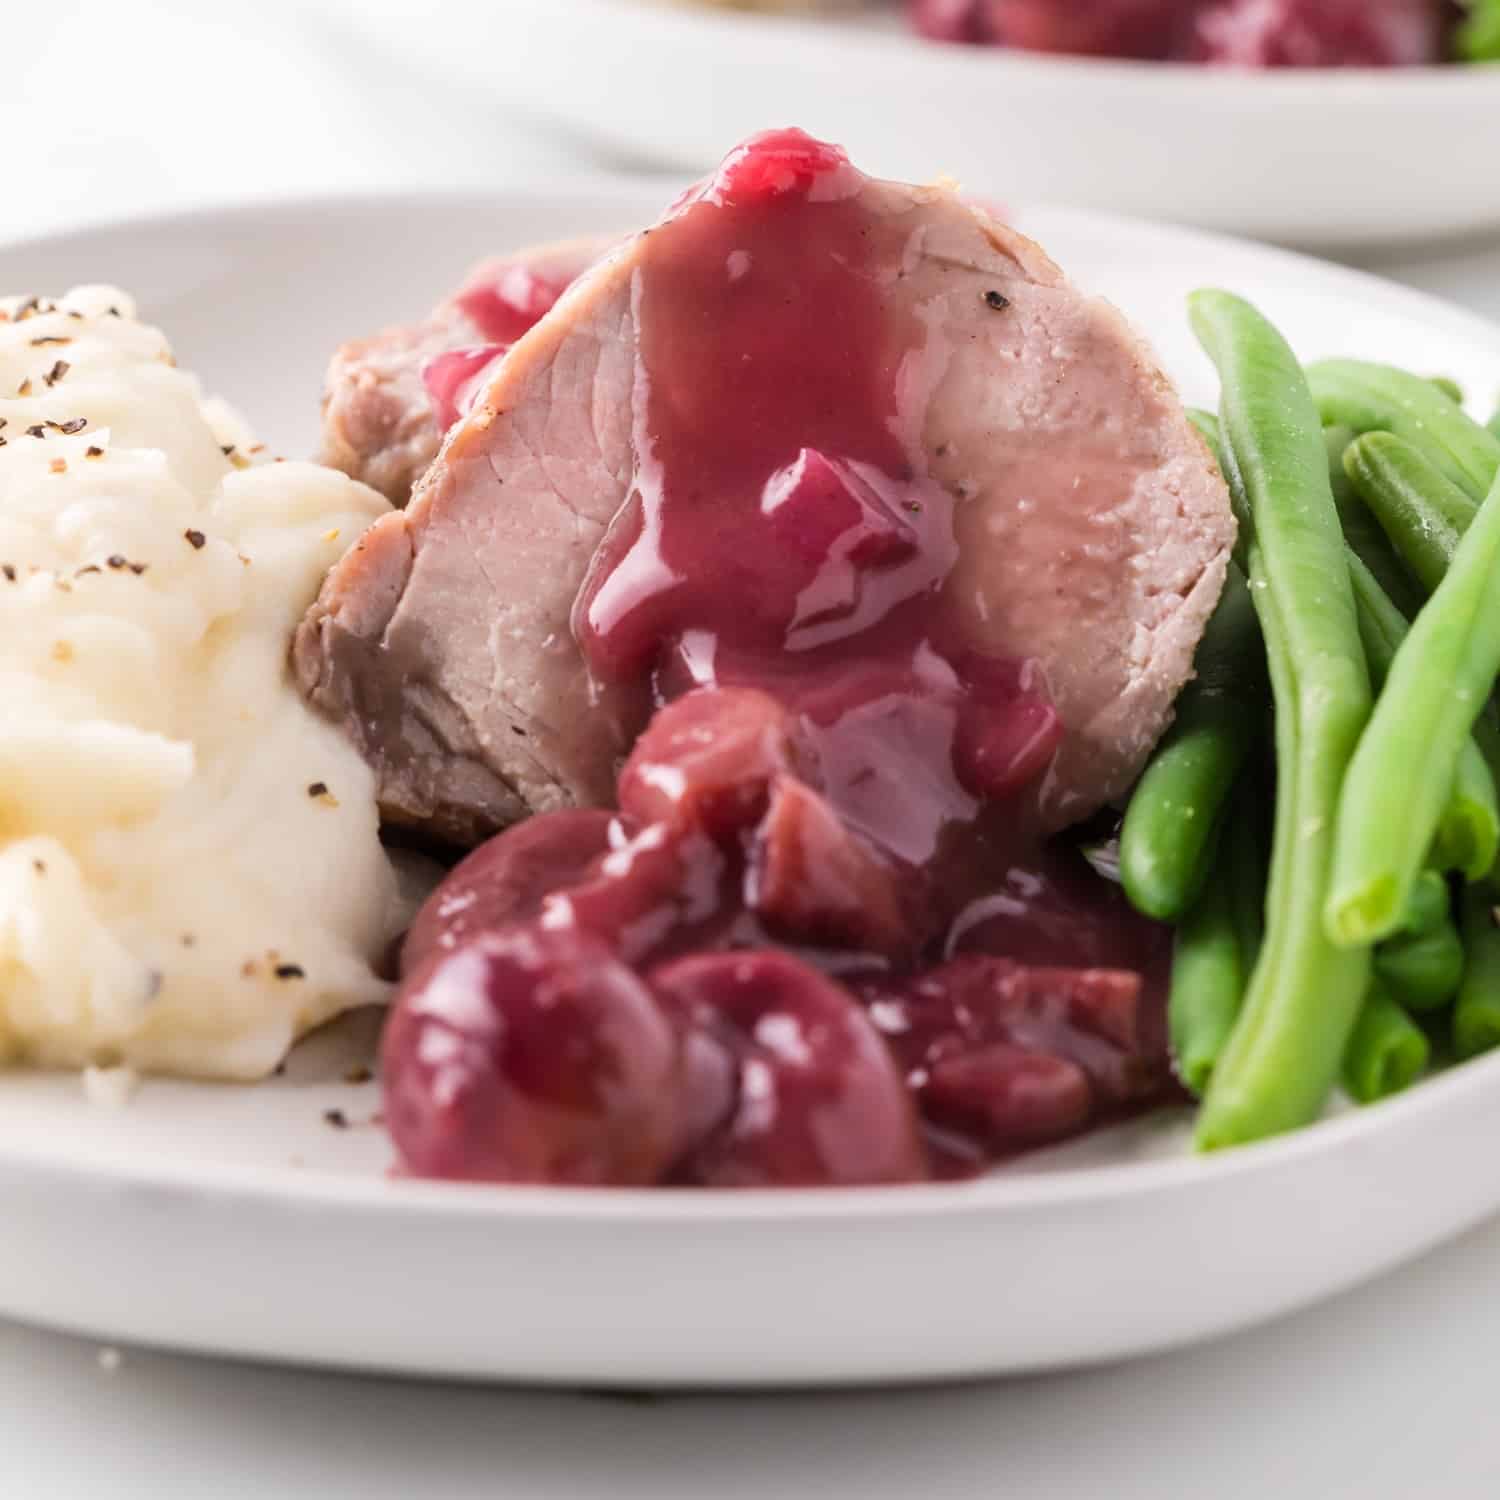 Sliced pork tenderloin with port wine sauce, roasted grapes, green beans and potatoes.